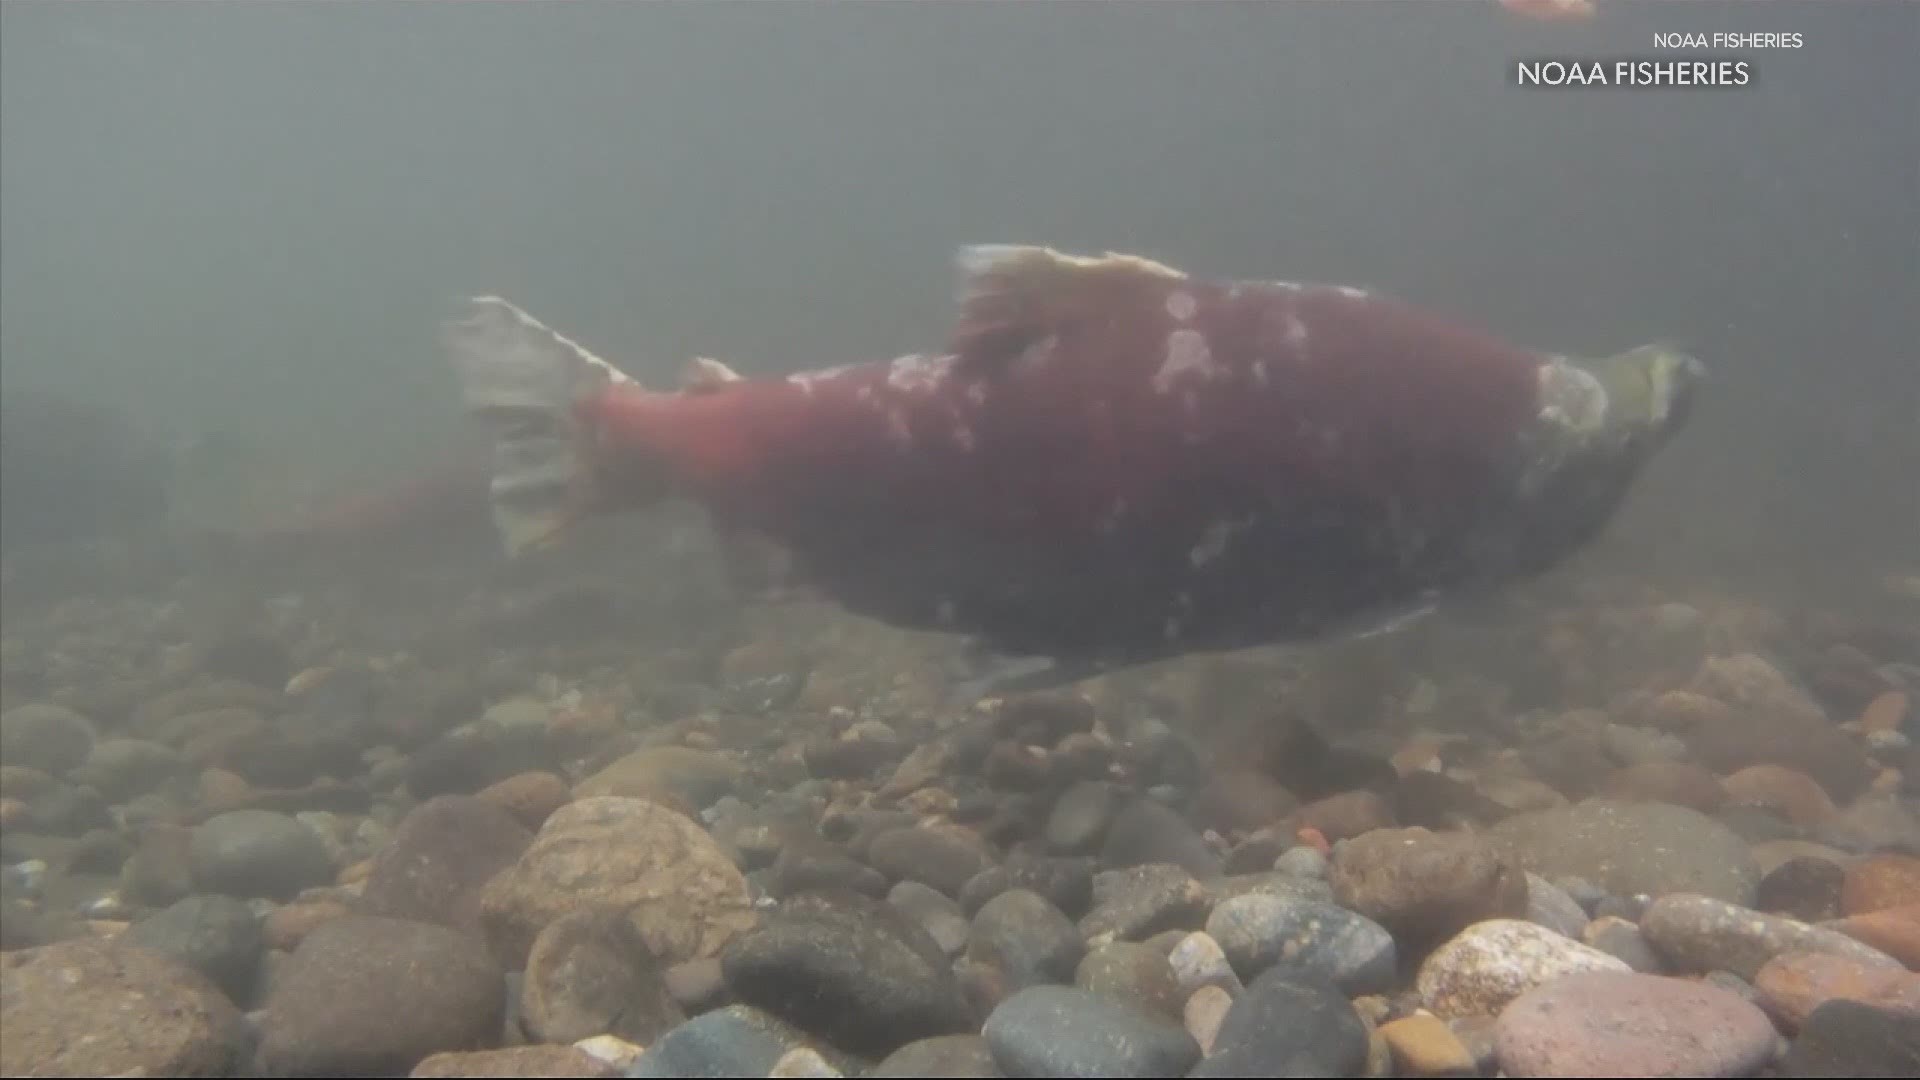 Researchers are examining what could be causing salmon to shrink. Keely Chalmers spoke with the experts.